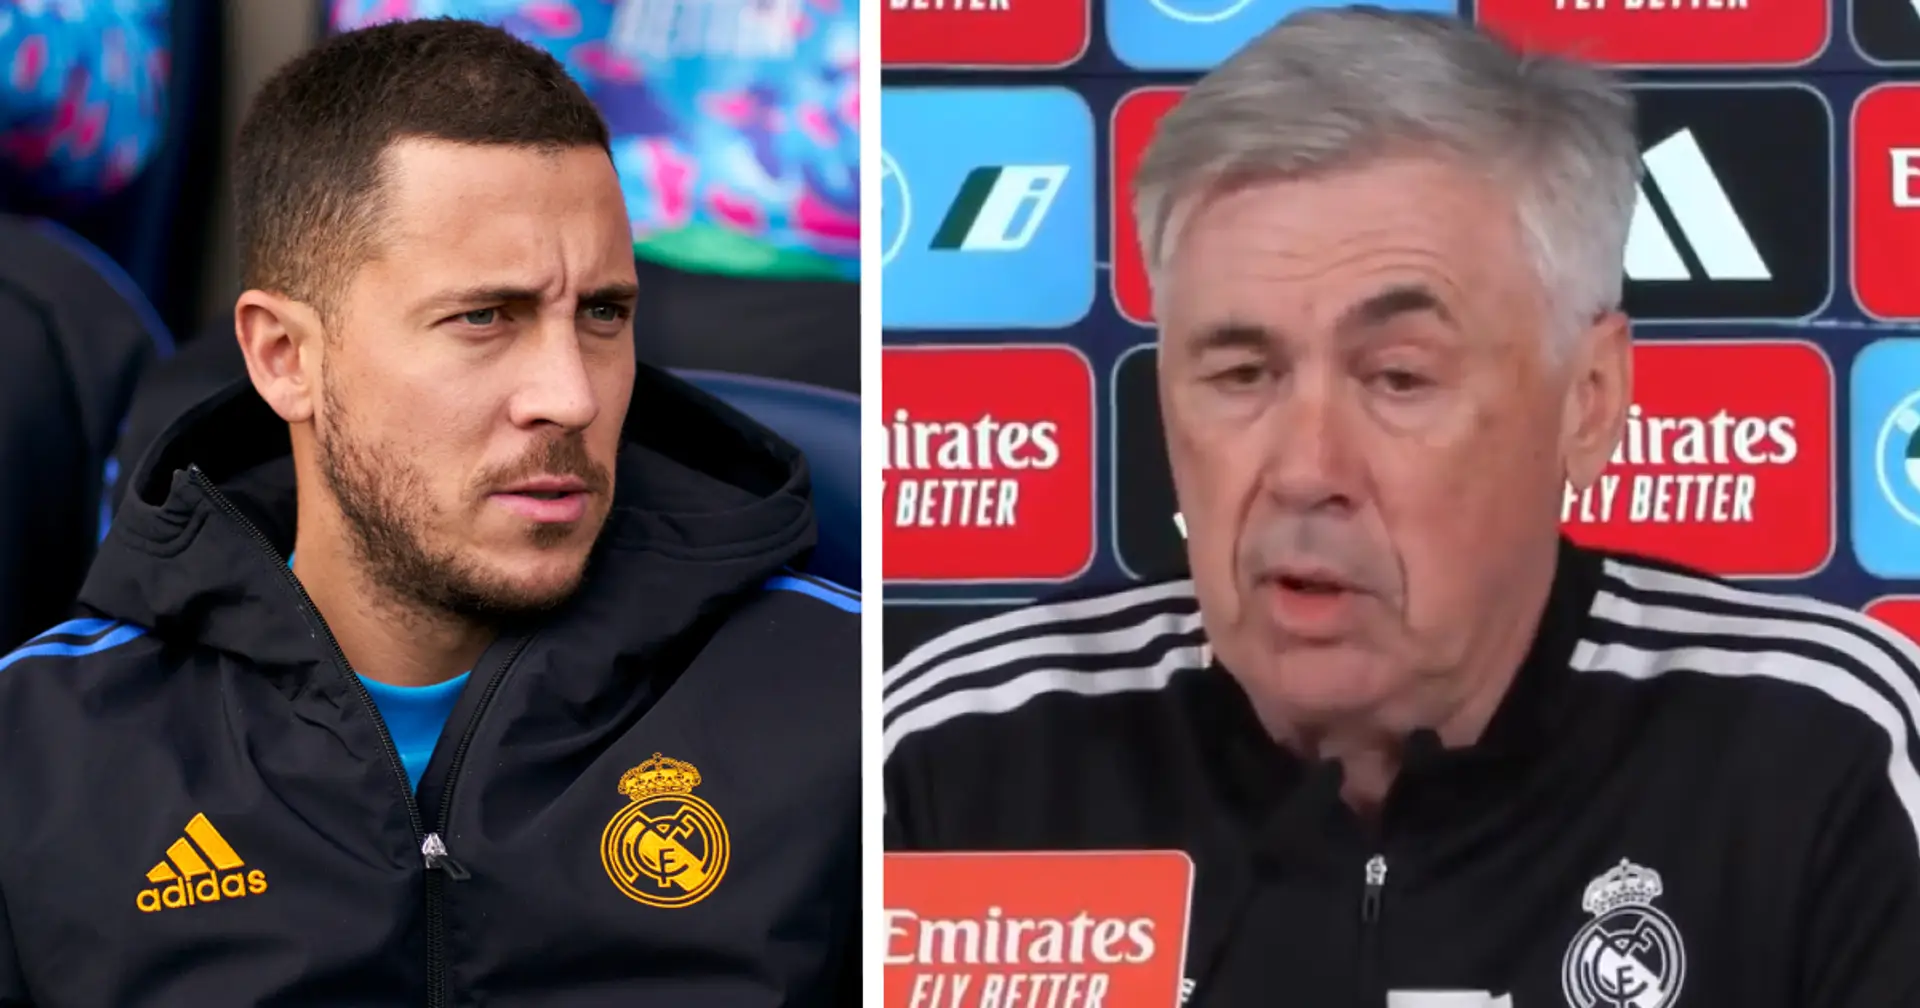 'He wants to play': Ancelotti comments on Hazard's situation ahead of El Clasico